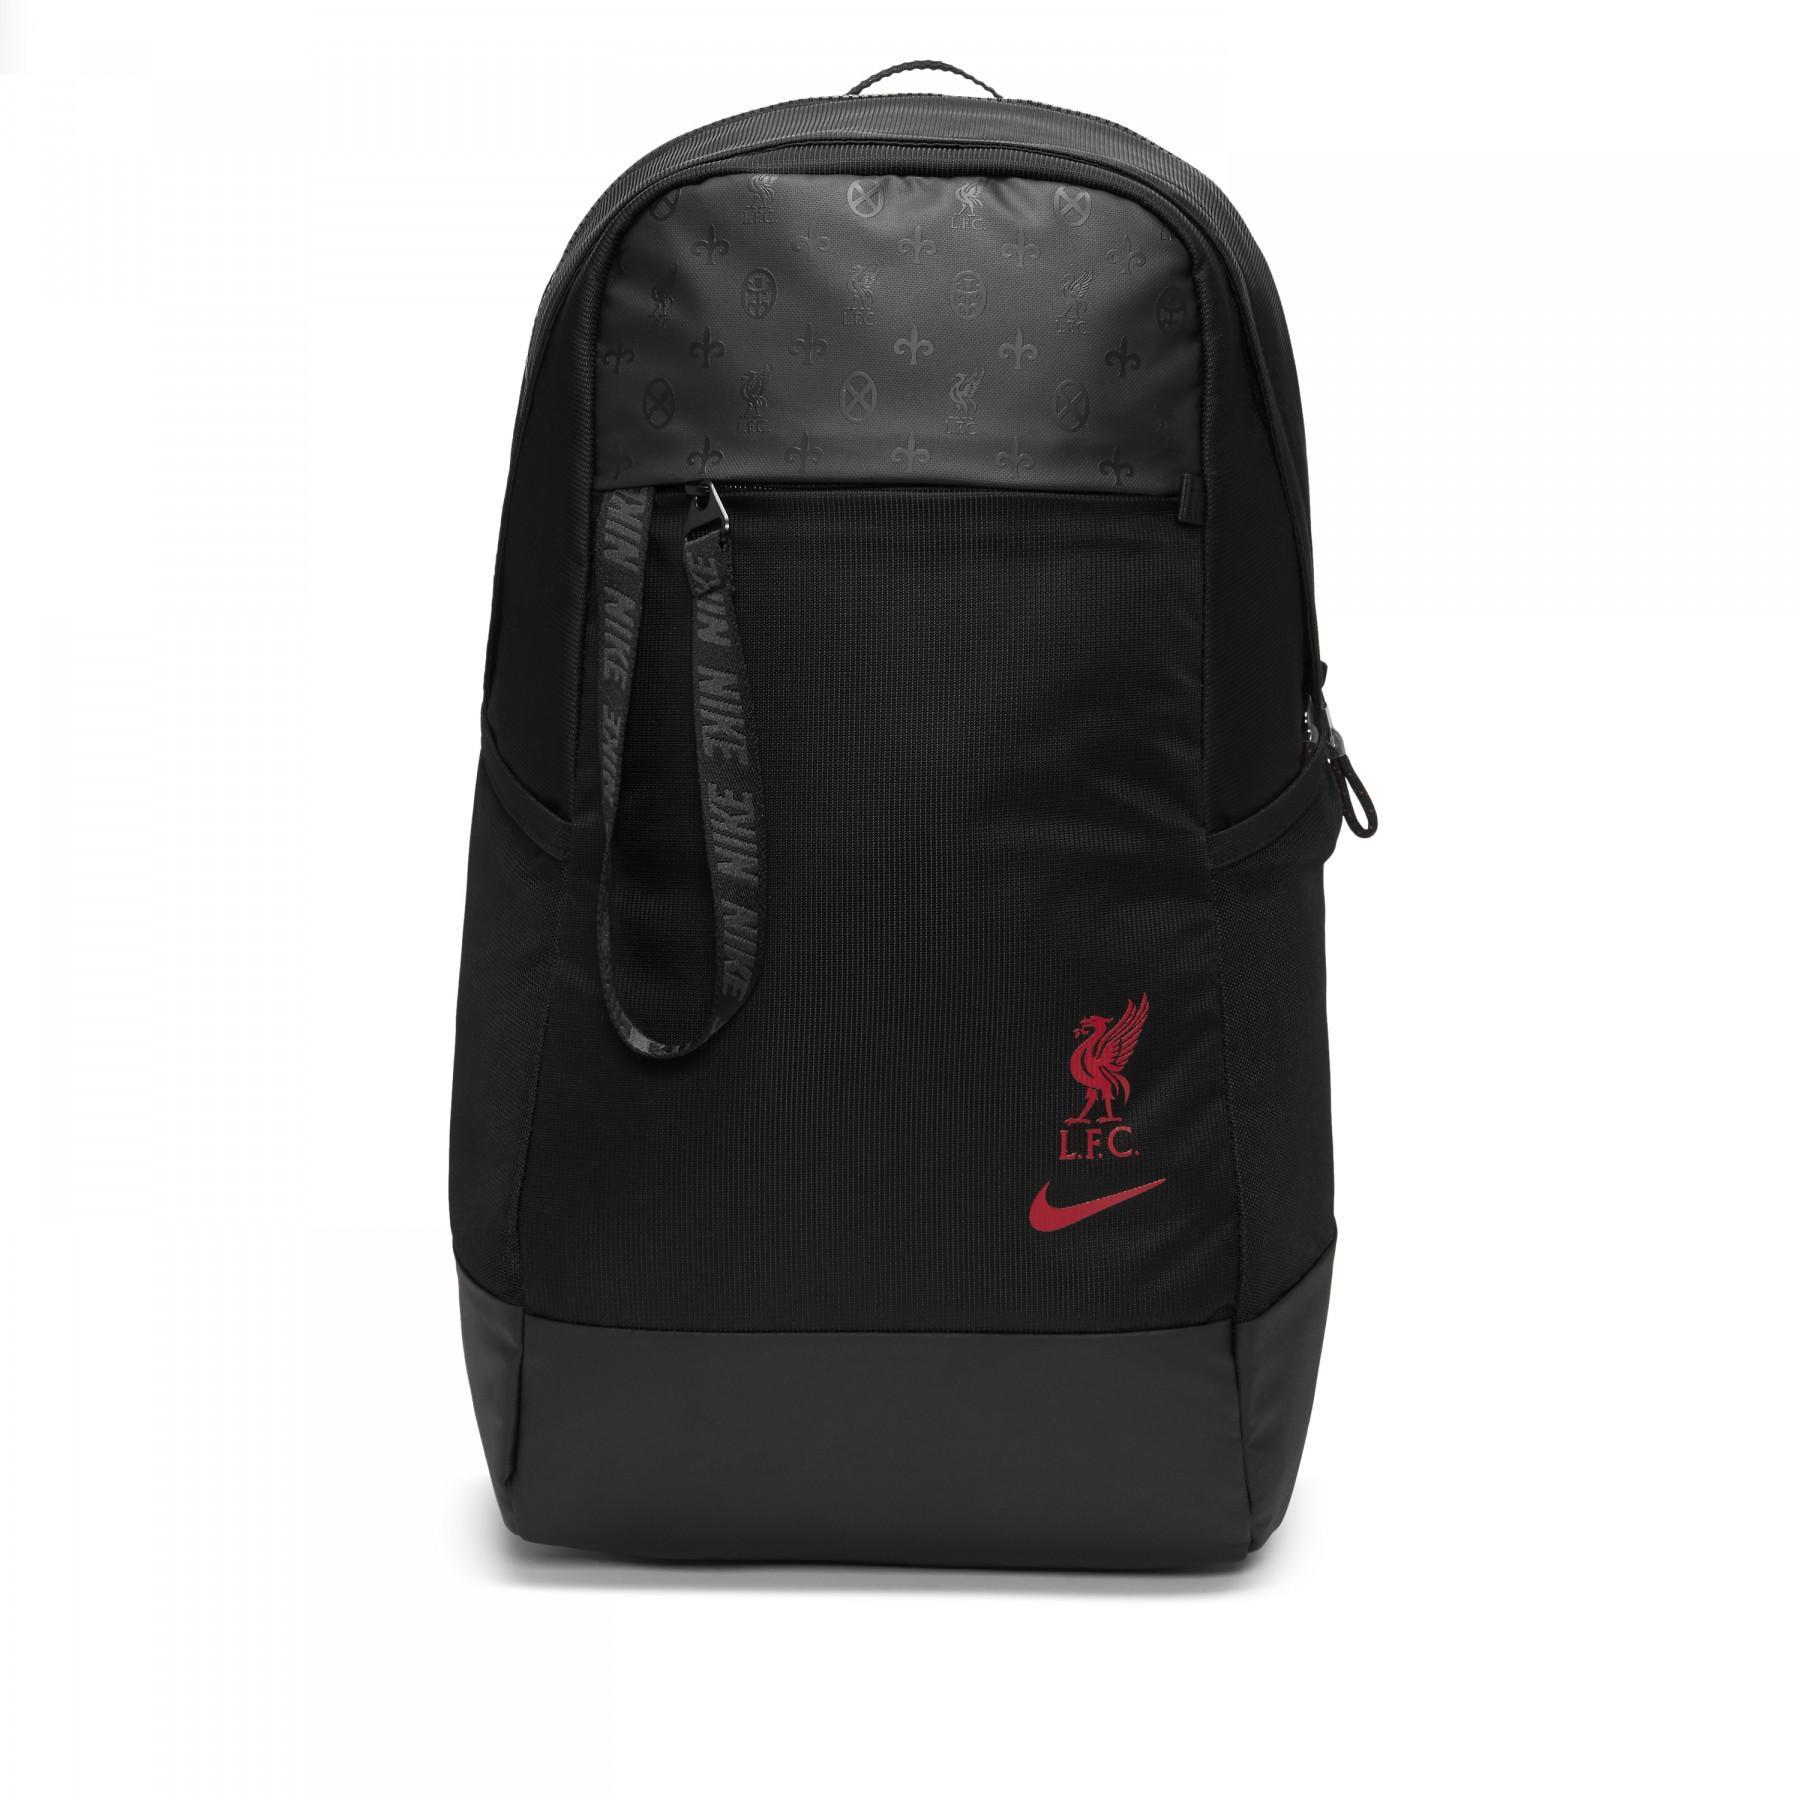 Backpack liverpool